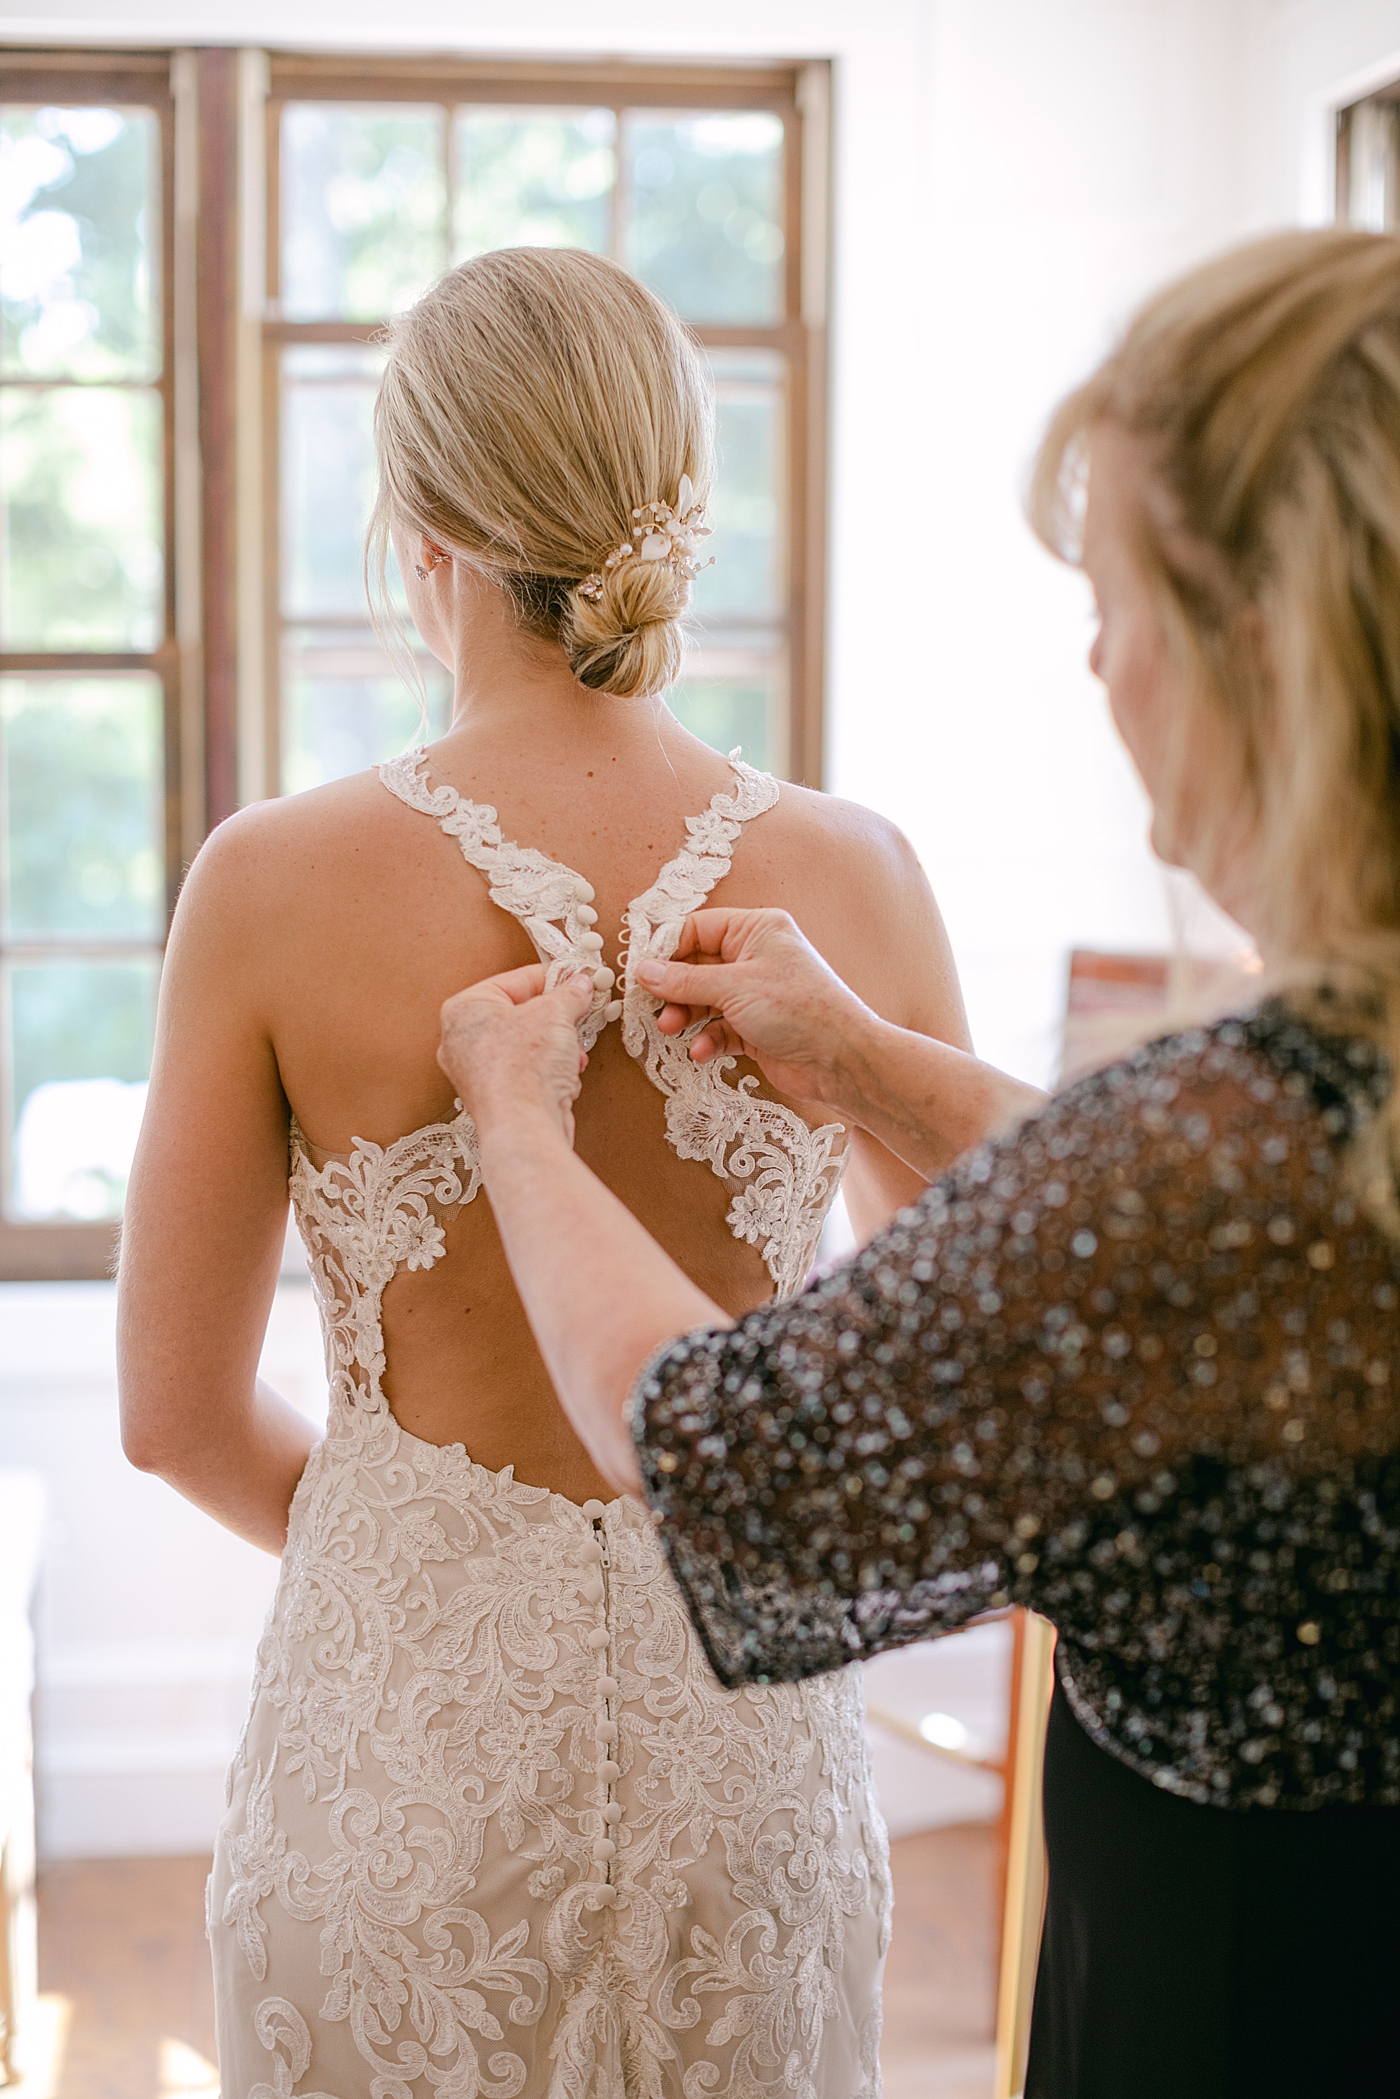 Bride getting into her dress | Image by Hope Helmuth Photography